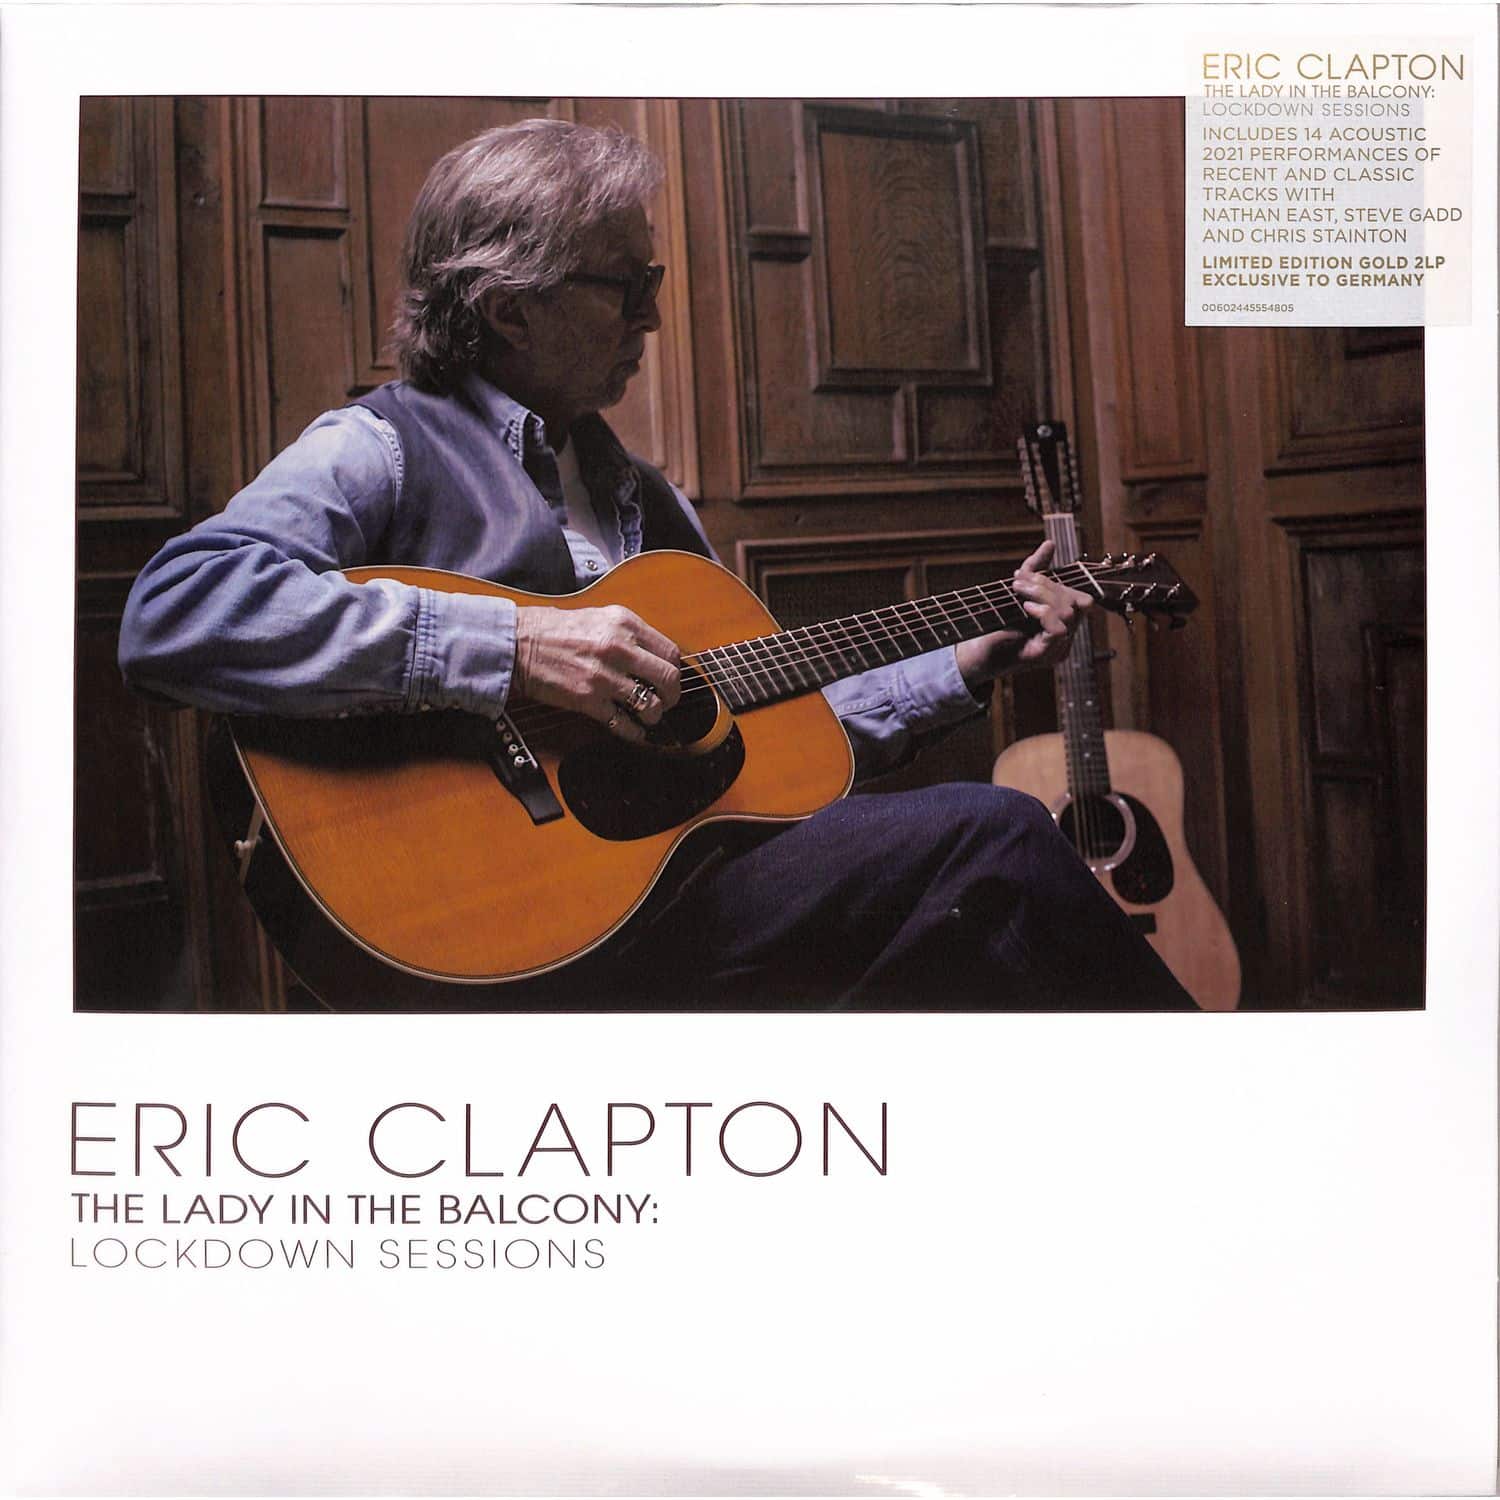 Eric Clapton - LADY IN THE BALCONY LOCKDOWN SESSIONS